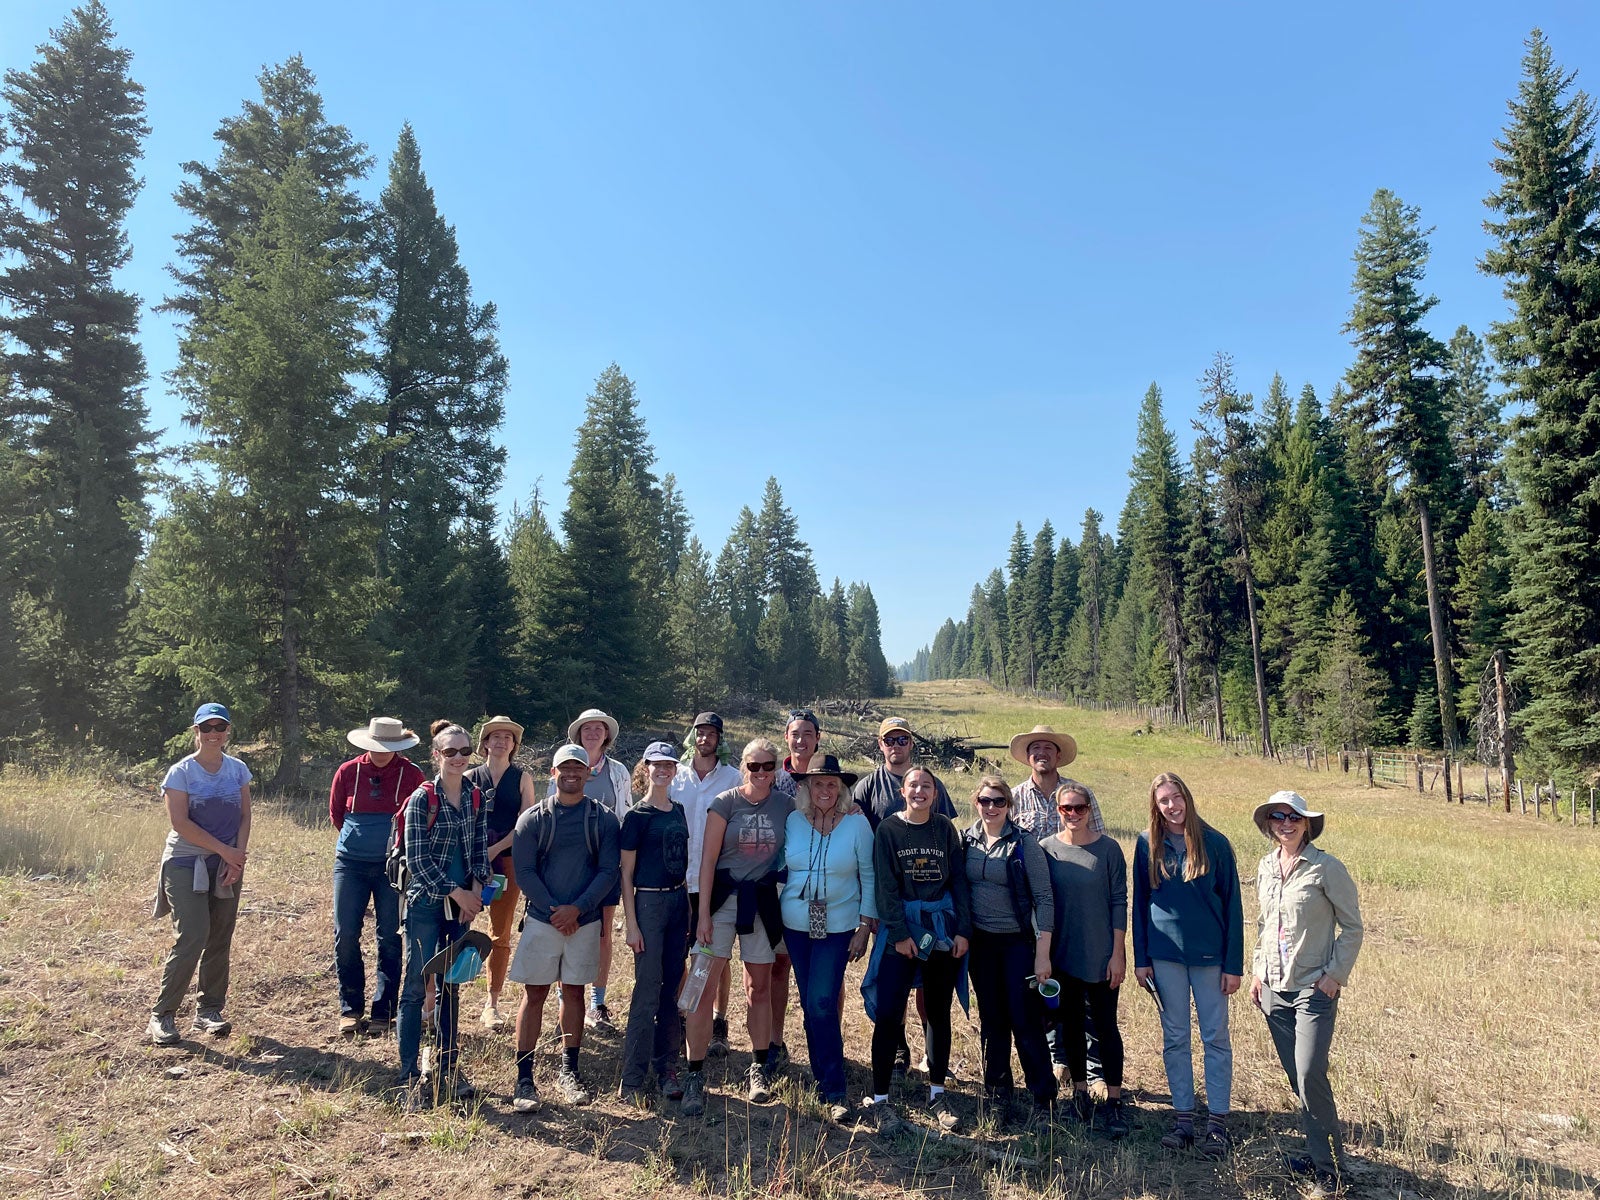 Boise State faculty and students at the field school location